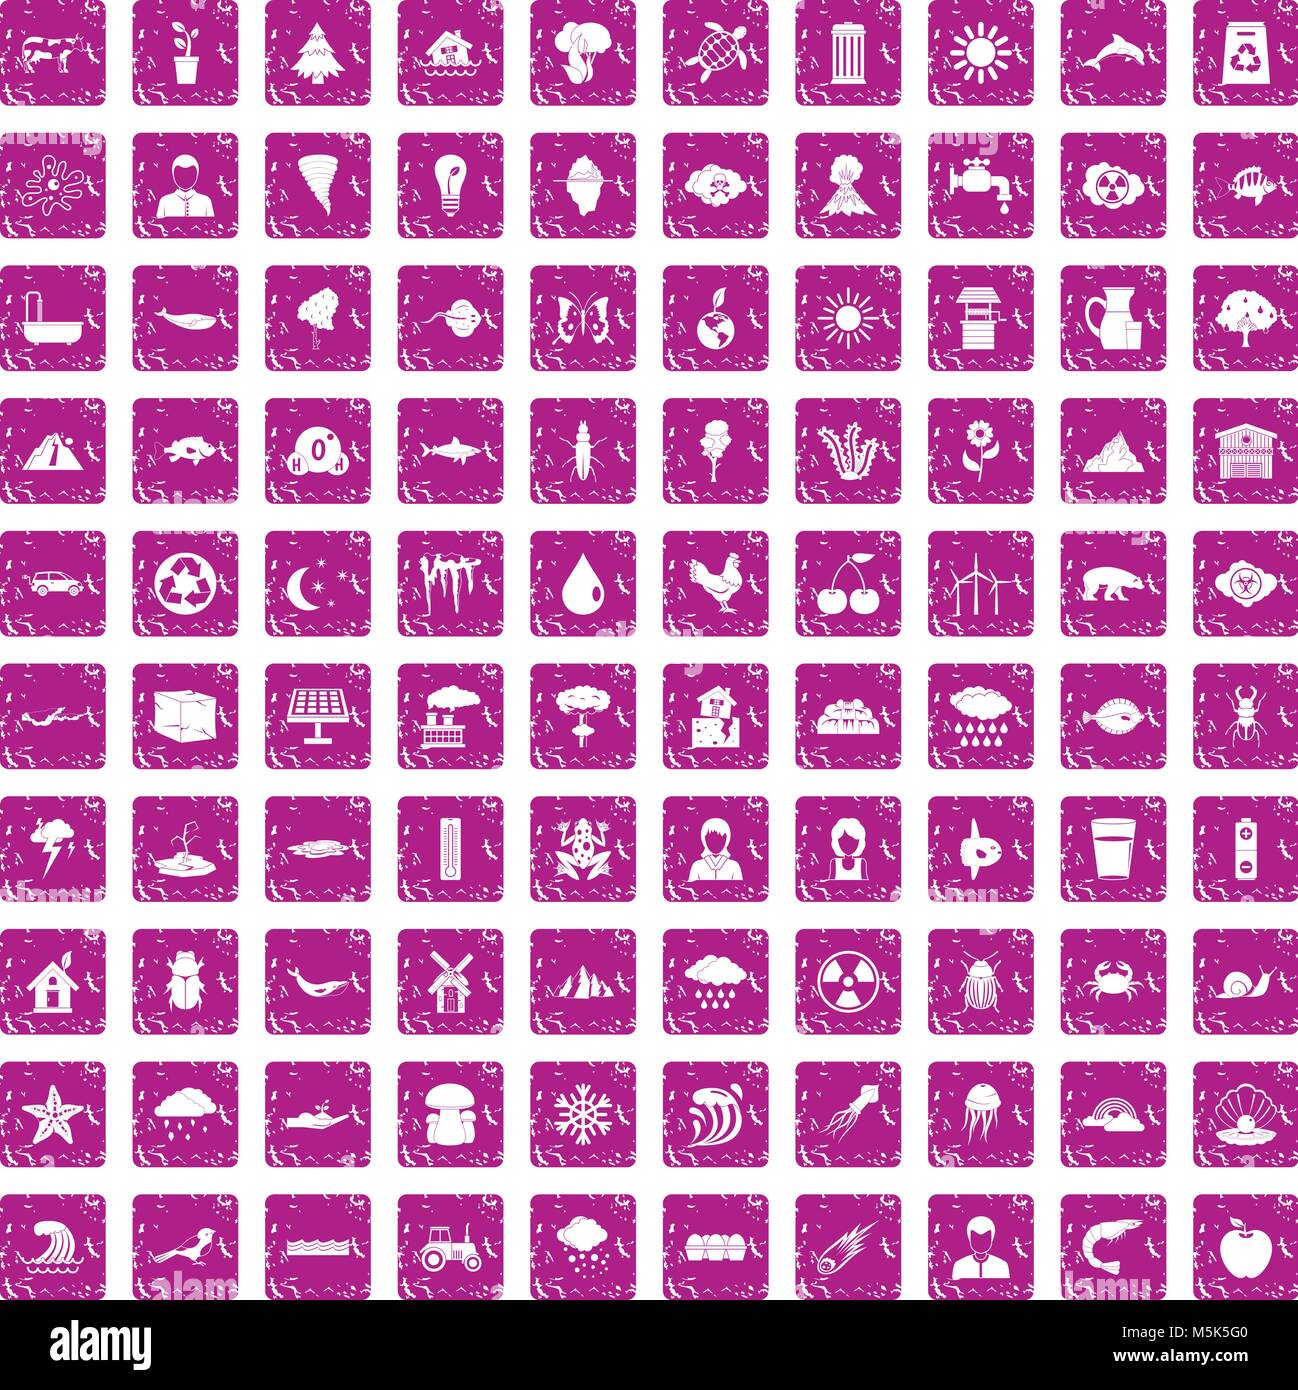 100 earth icons set grunge pink Stock Vector